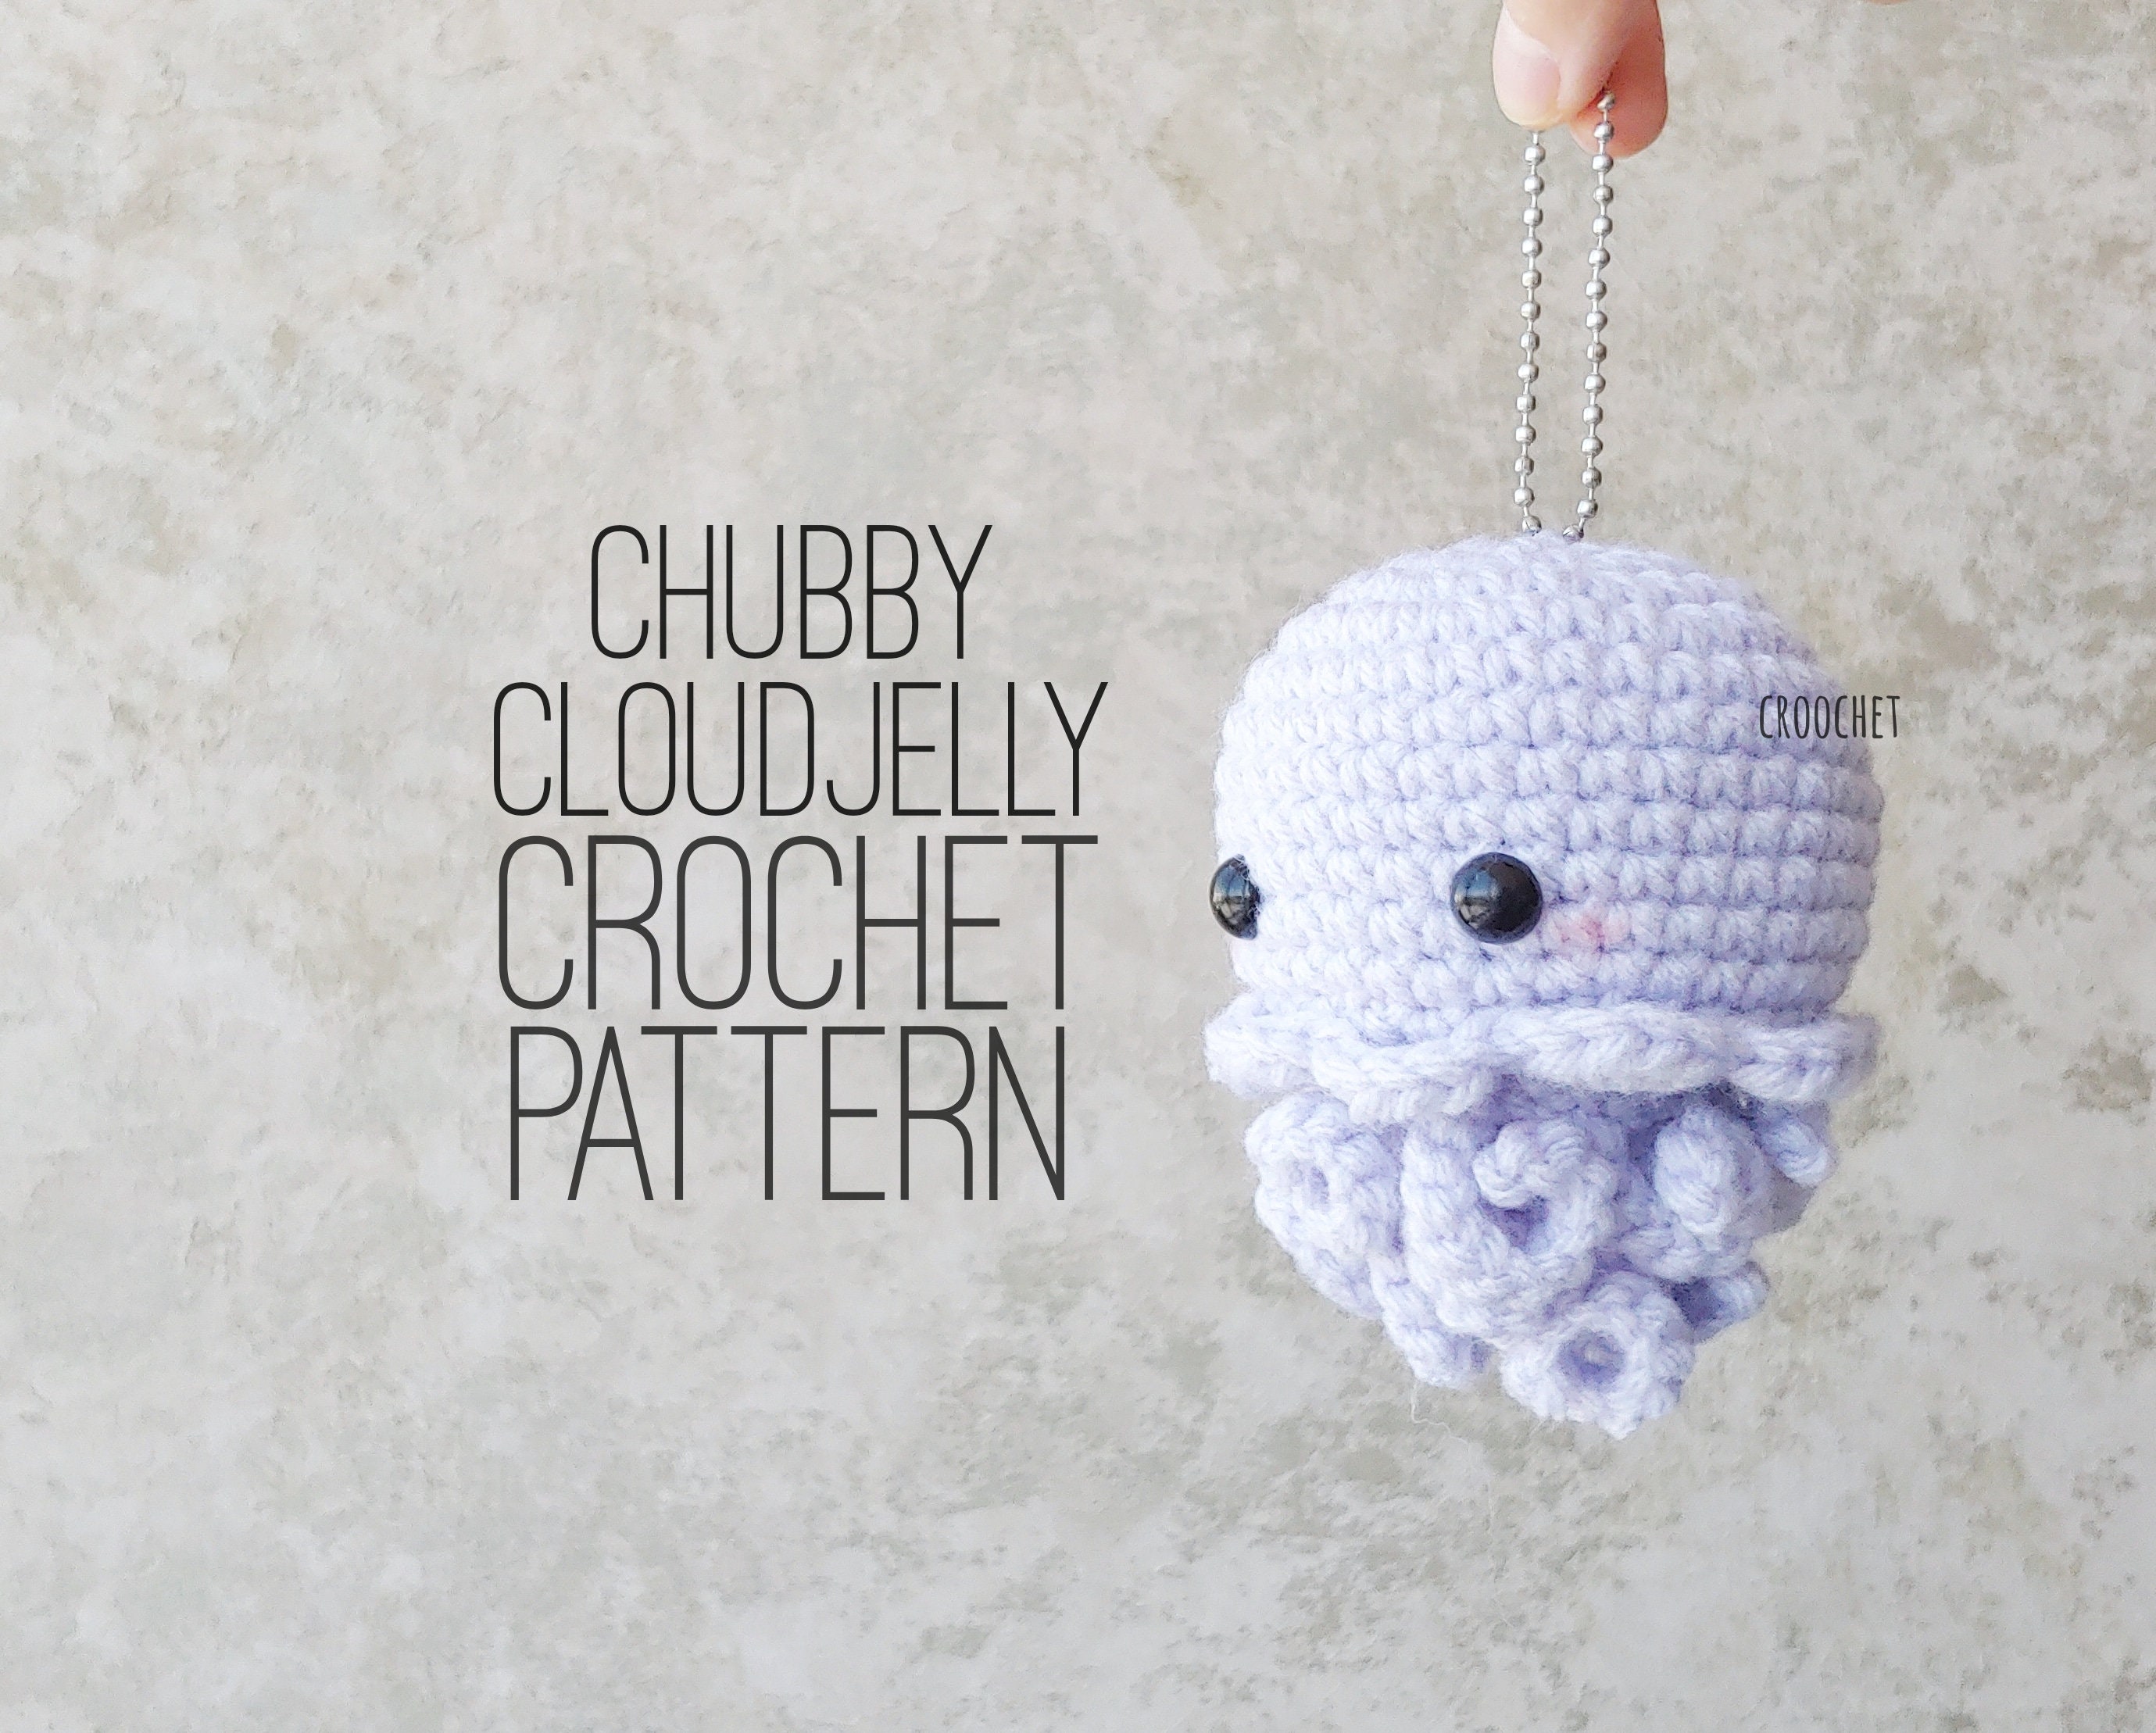 Nugget the Chubby Potato with Seedling Plant Crochet Pattern